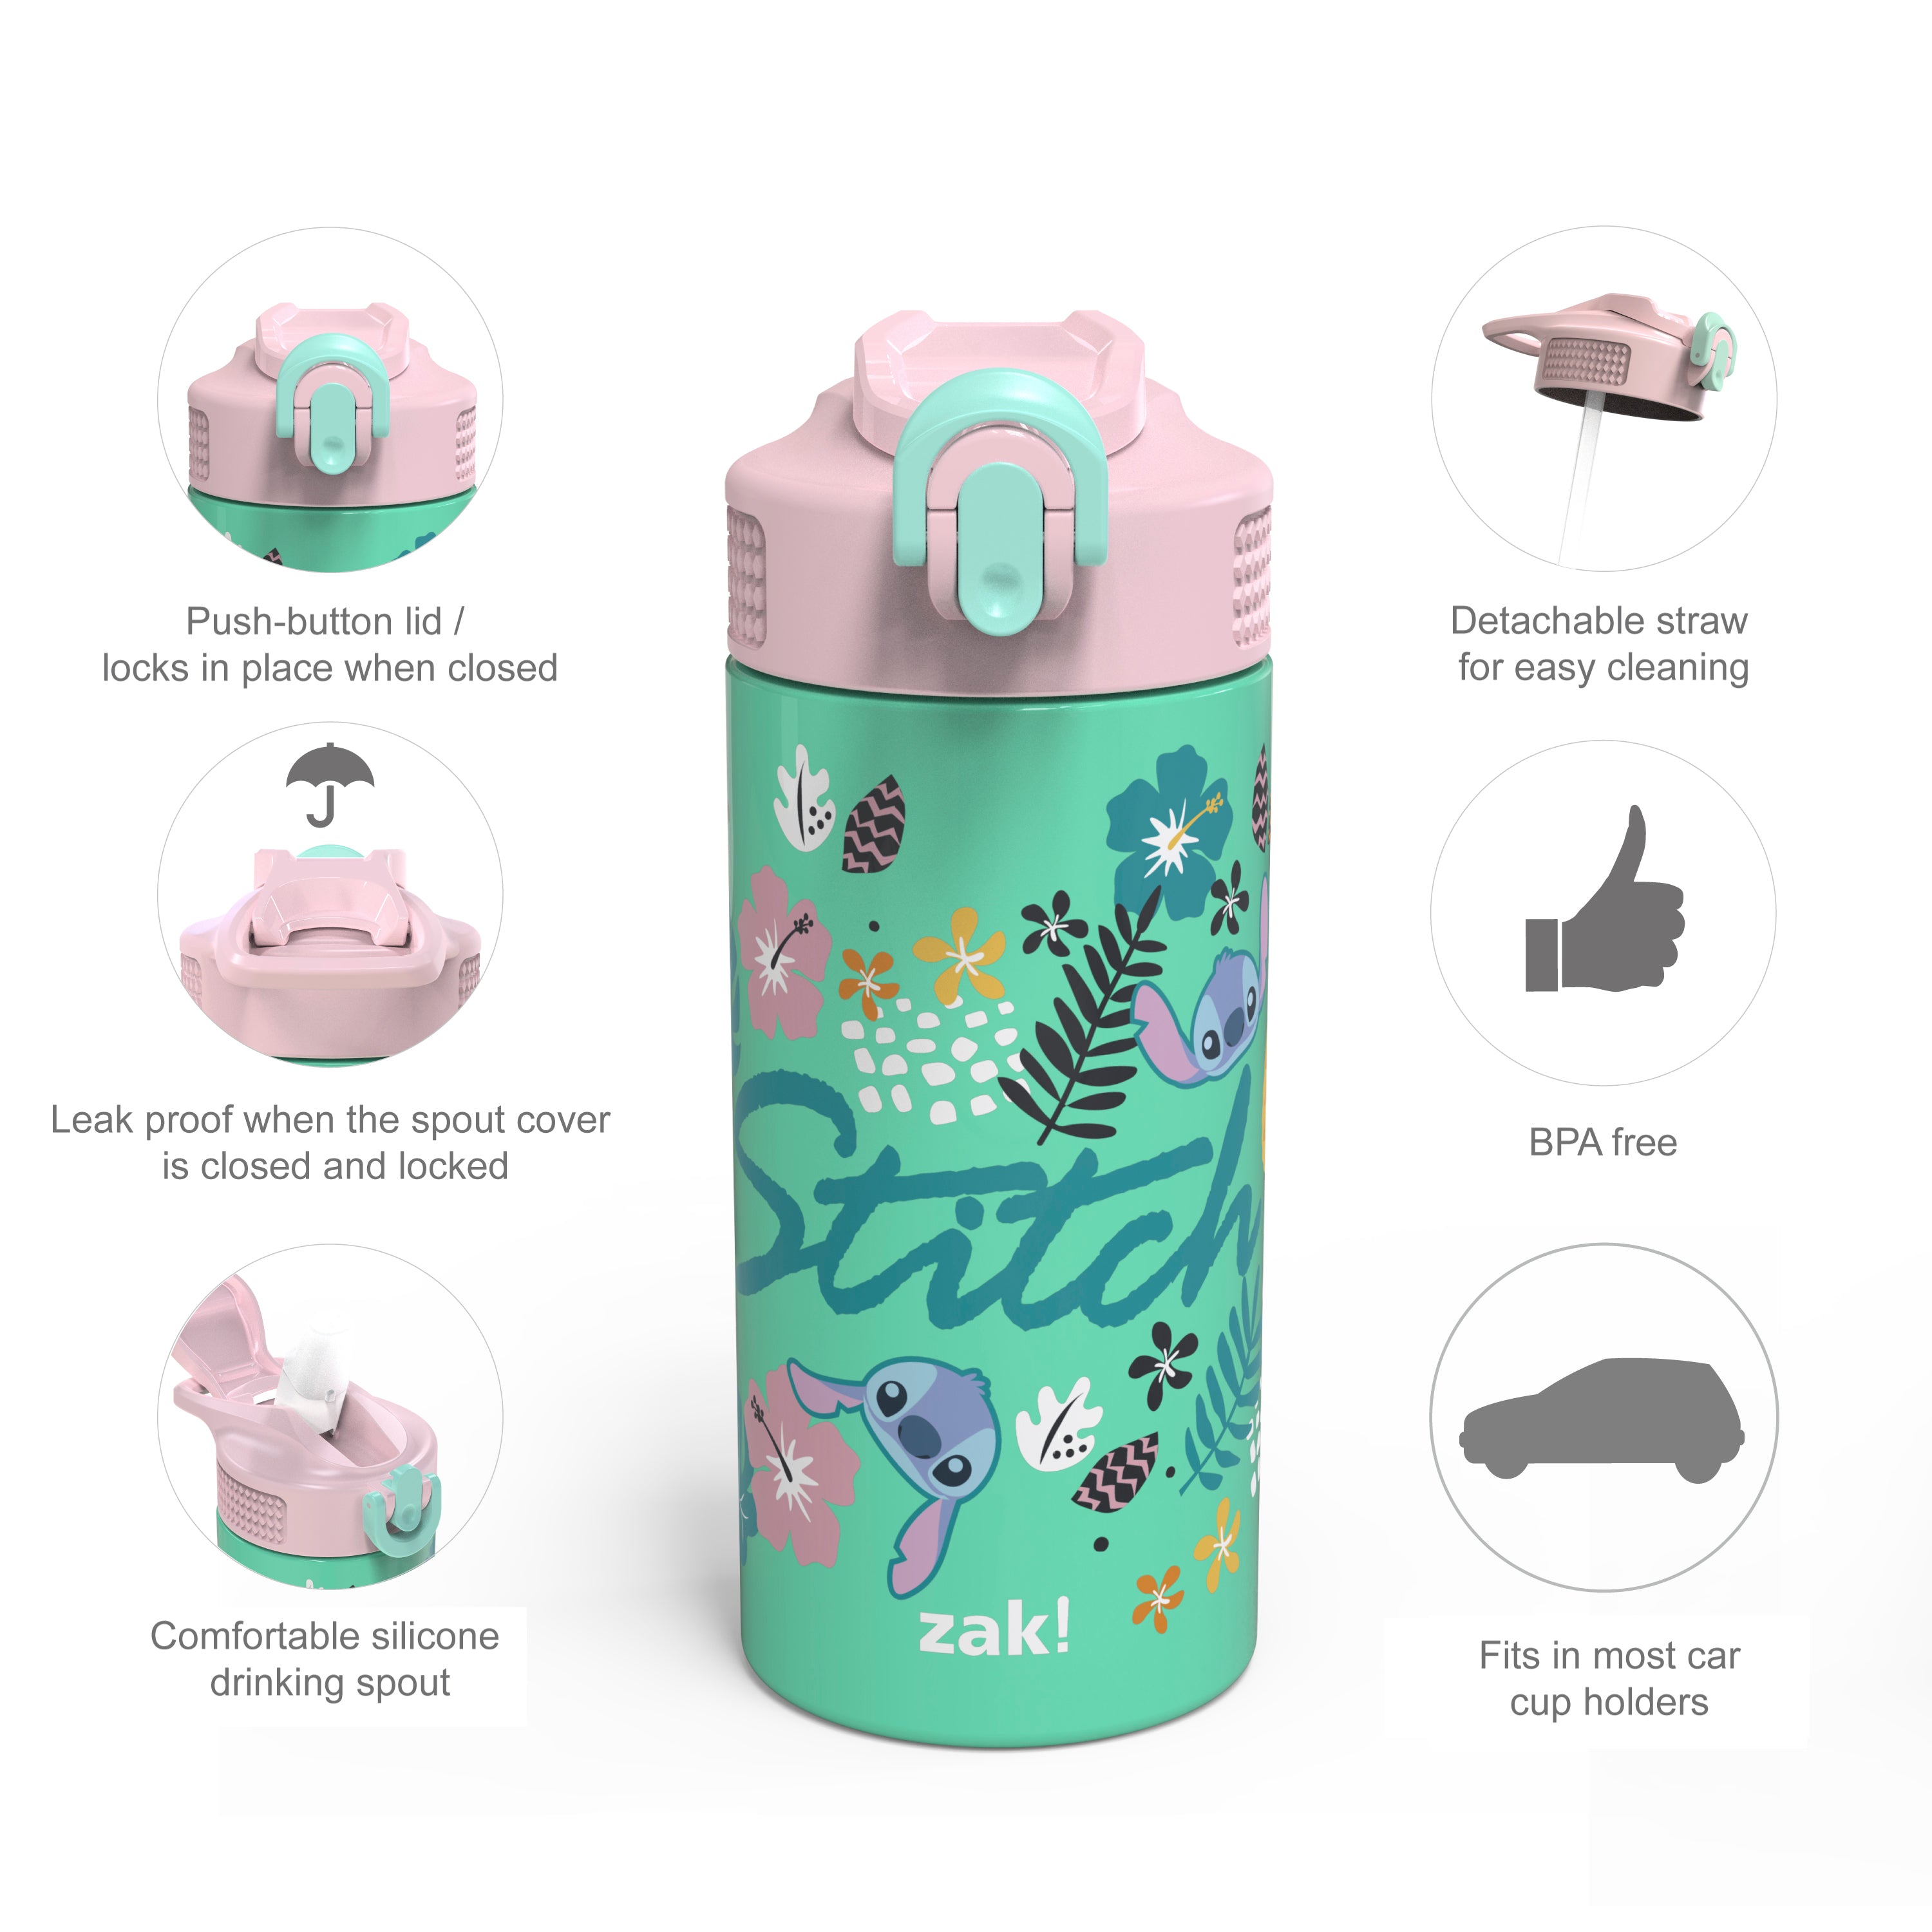 Disney Lilo & Stitch Kids Stainless Steel Leak Proof Water Bottle with Push Button Lid and Spout